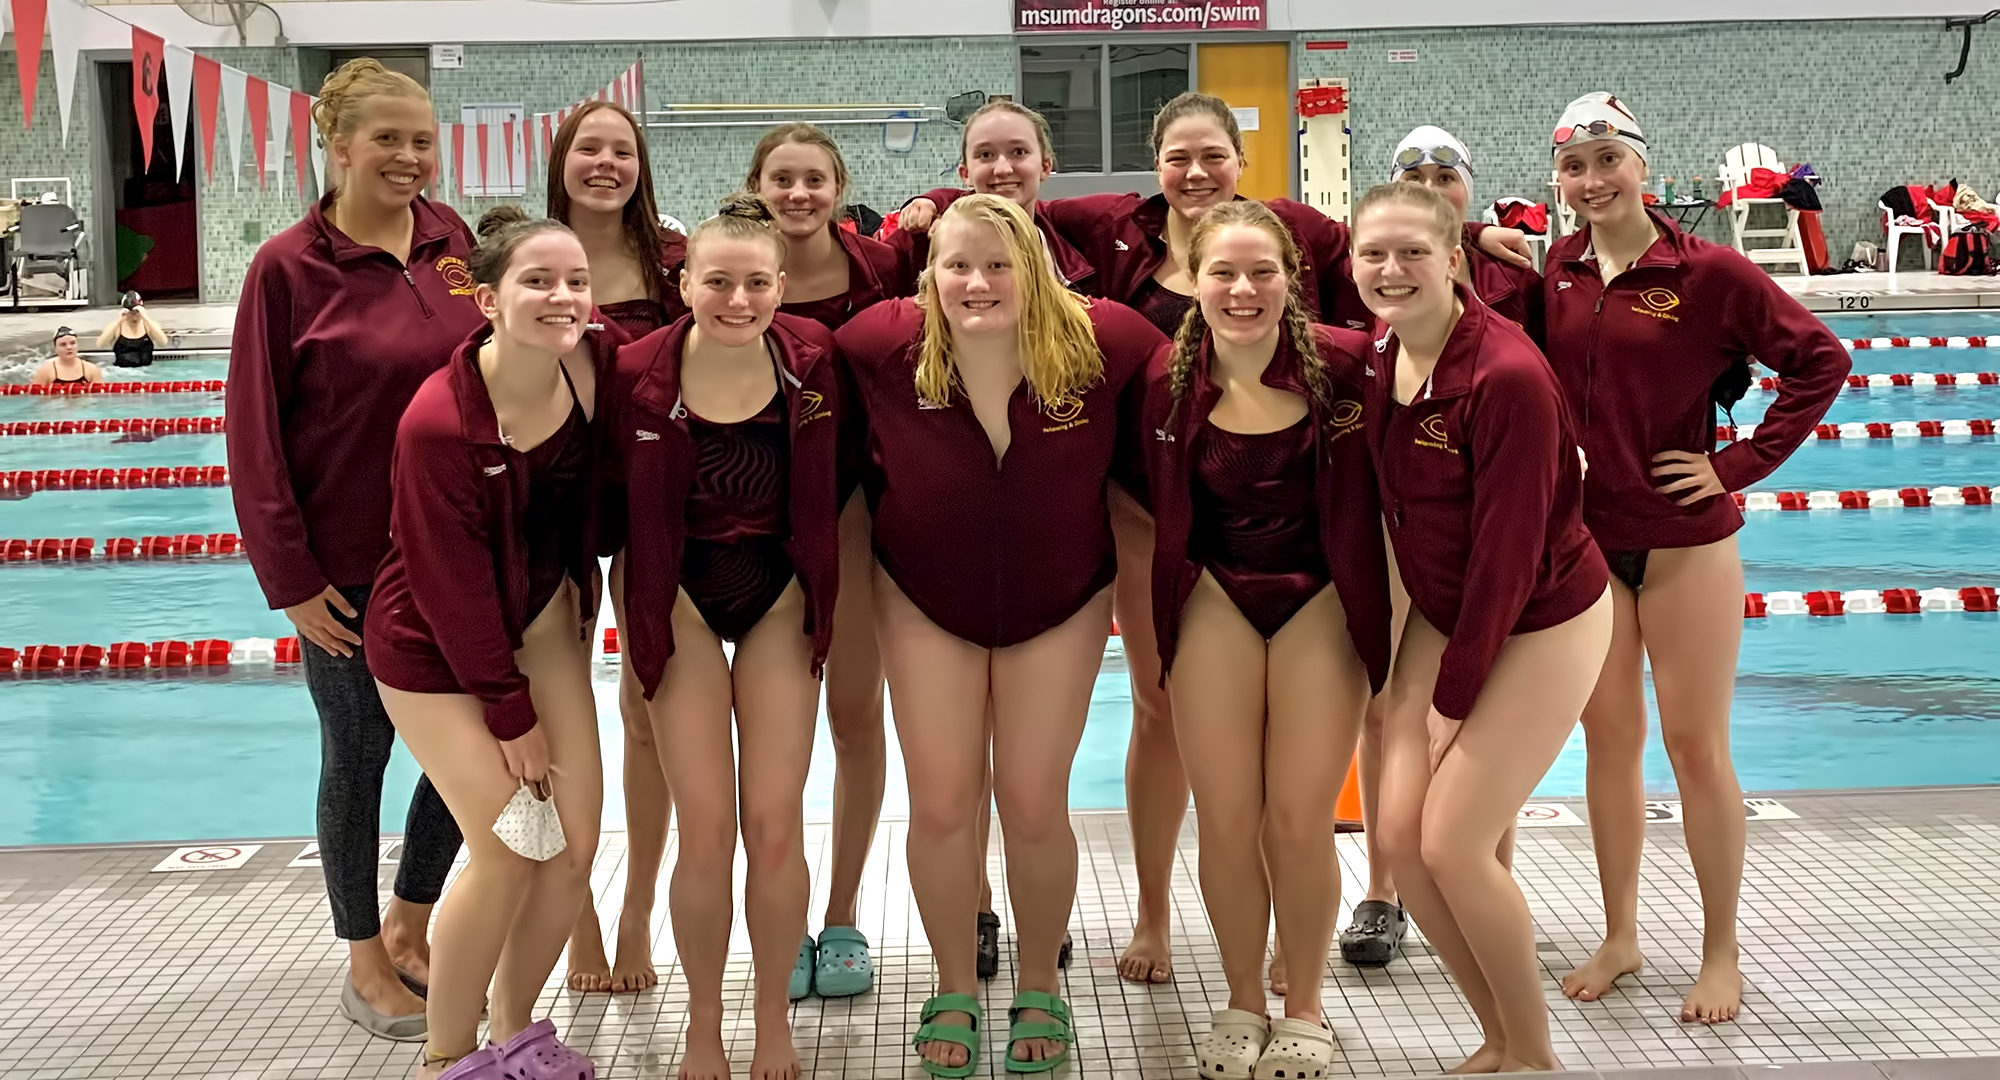 Concordia competed in back-to-back dual meets and came away with multiple events wins as they ramped up preparation for the MIAC Meet.